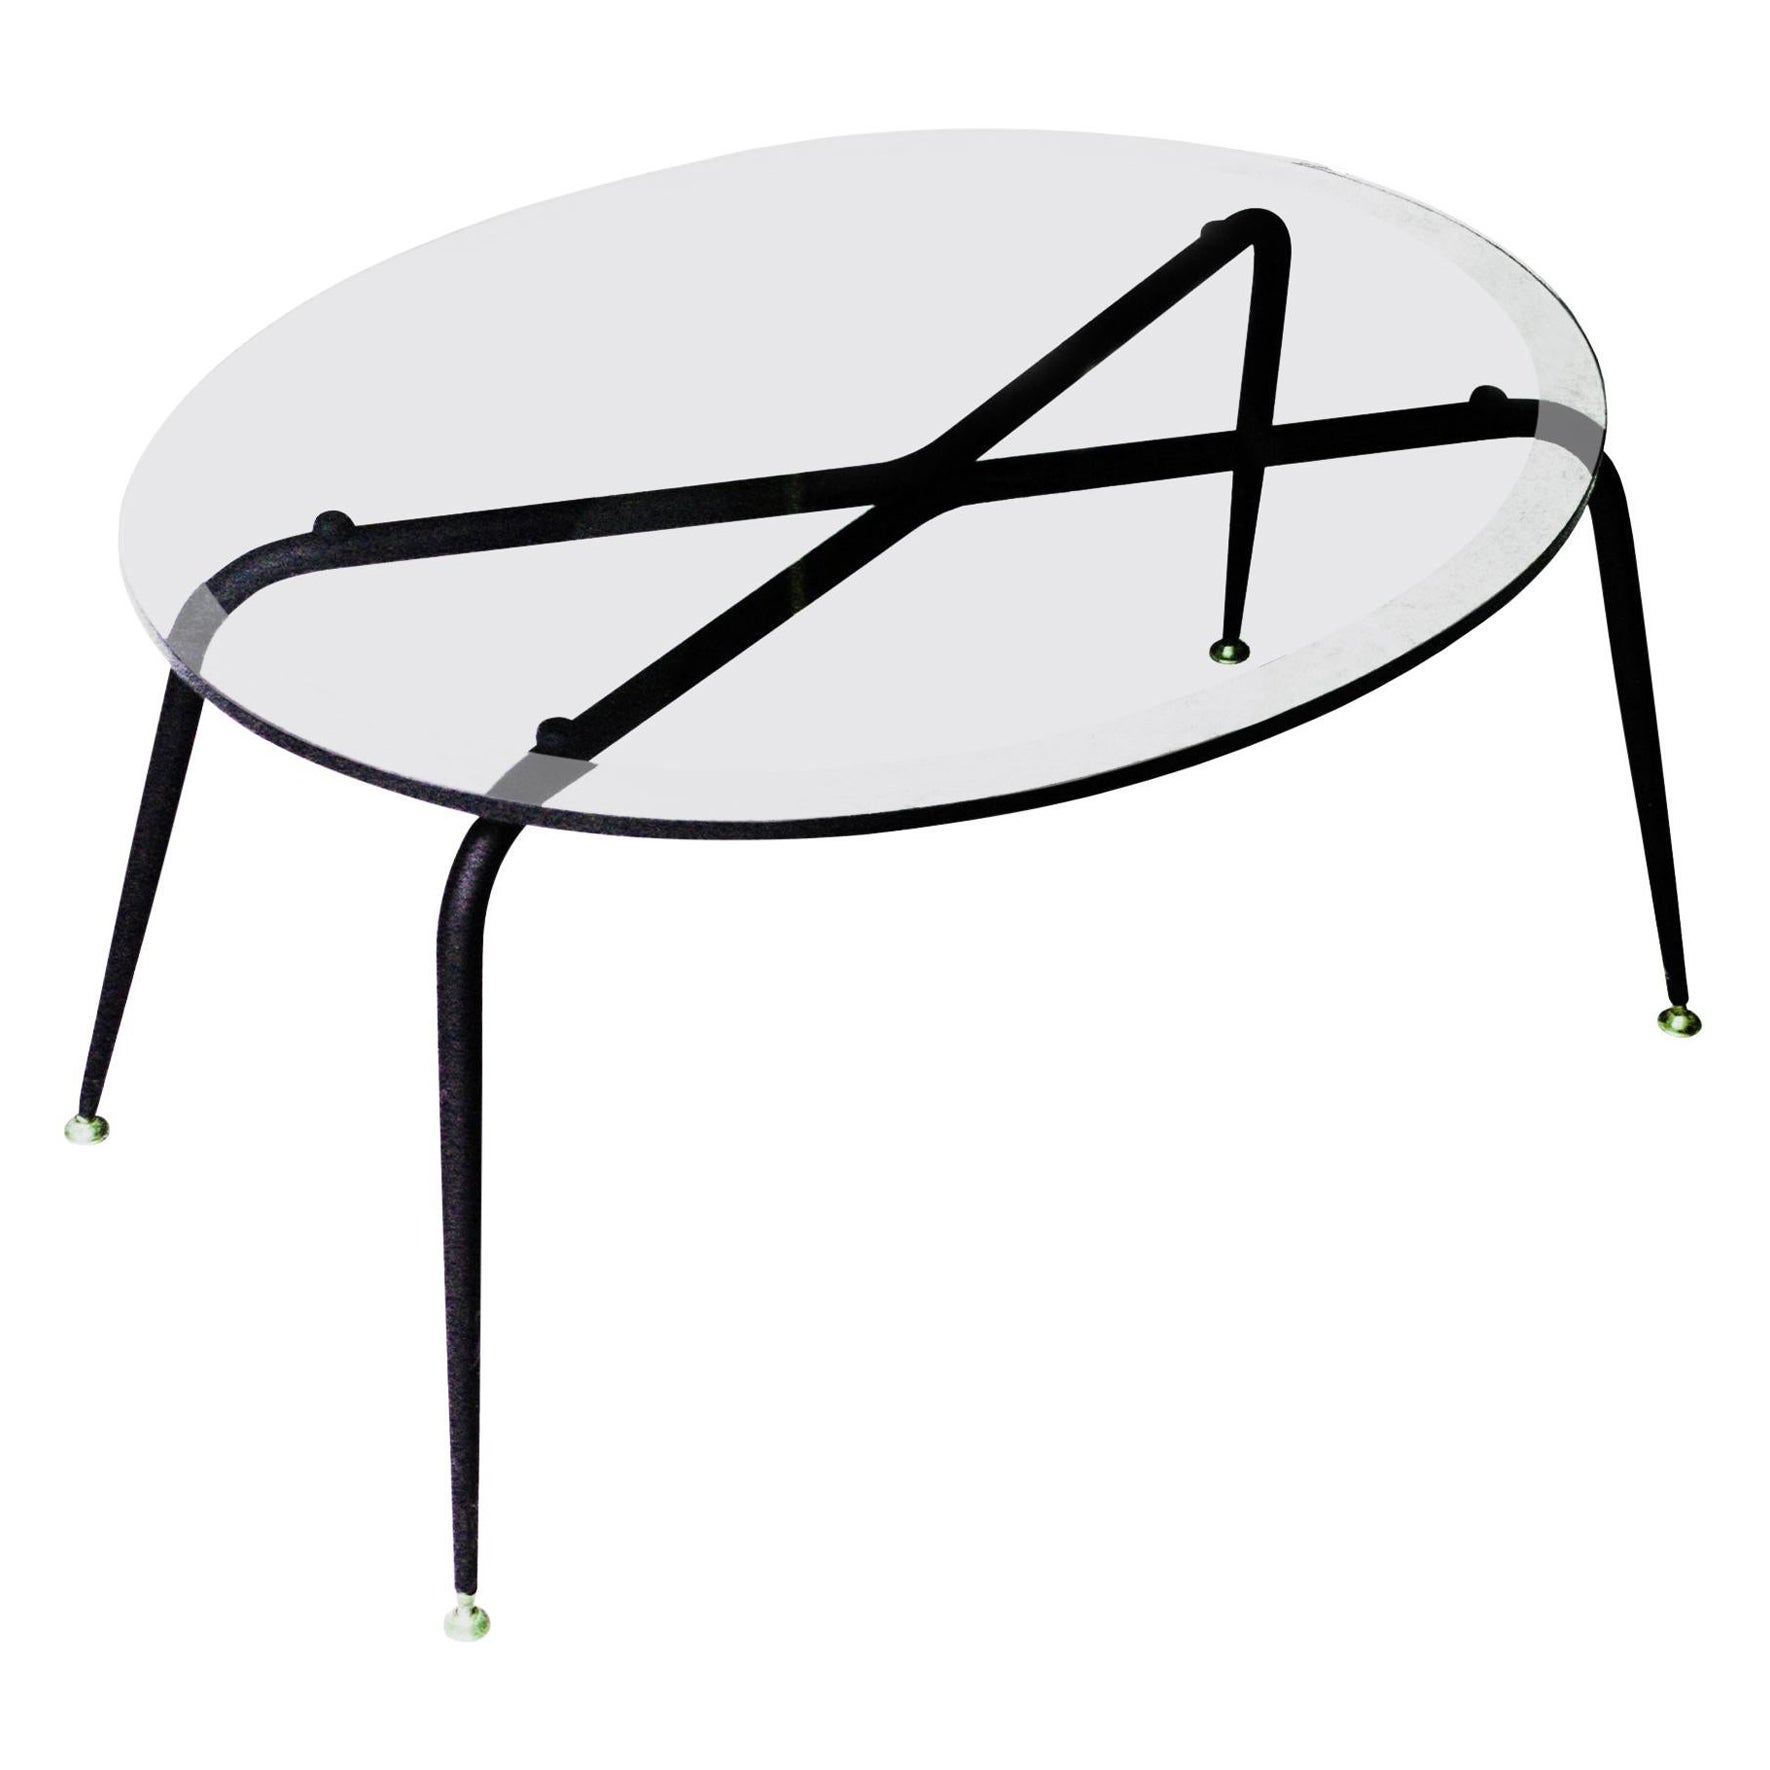 Coffee table with oval glass top and black lacquered metal base with pivoting brass pad supports.